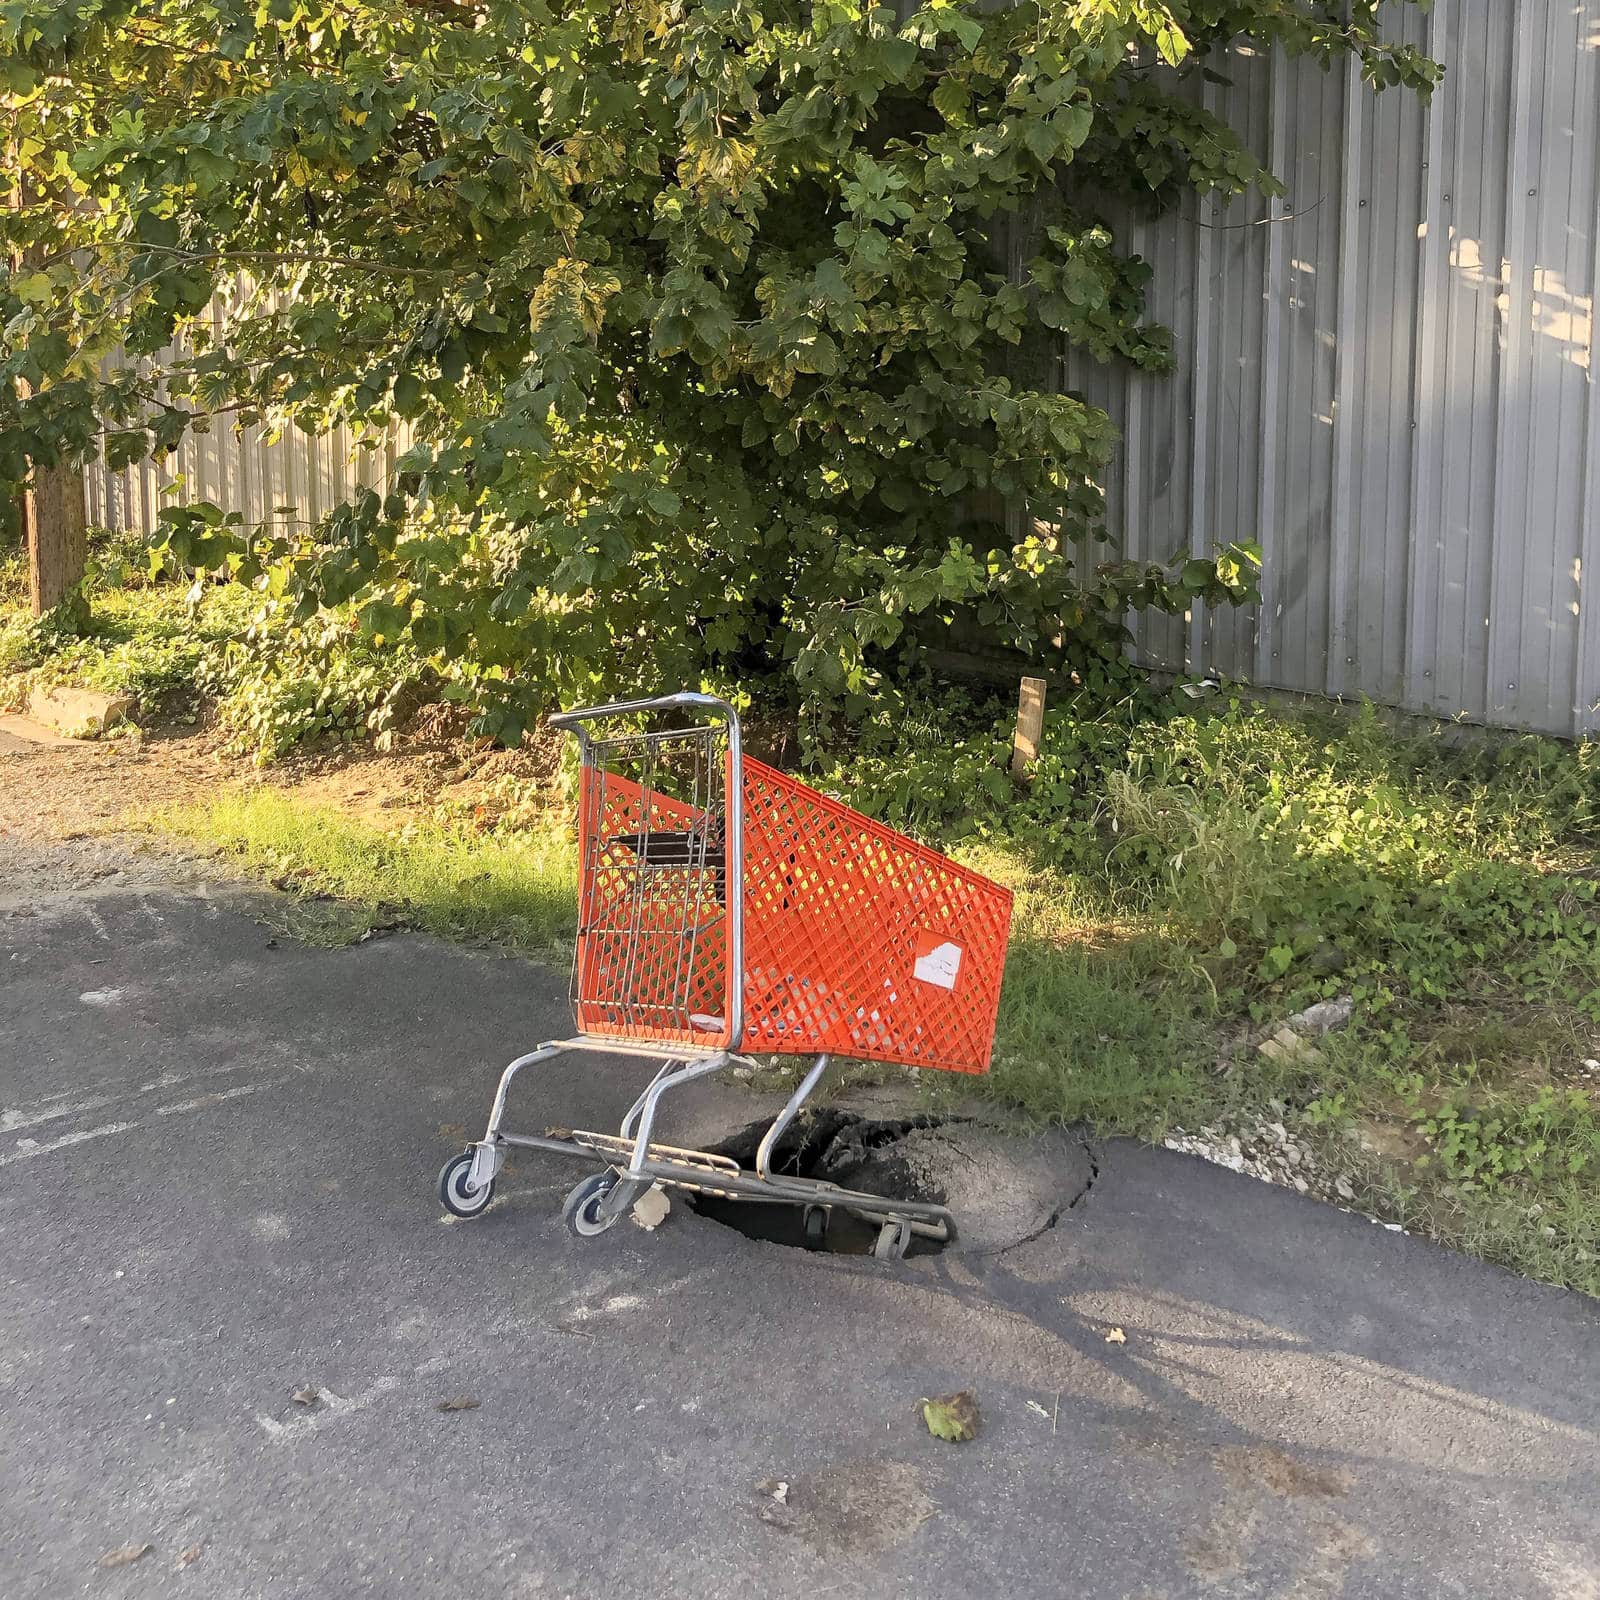 Photos People Remember: A shopping cart in a pot hole